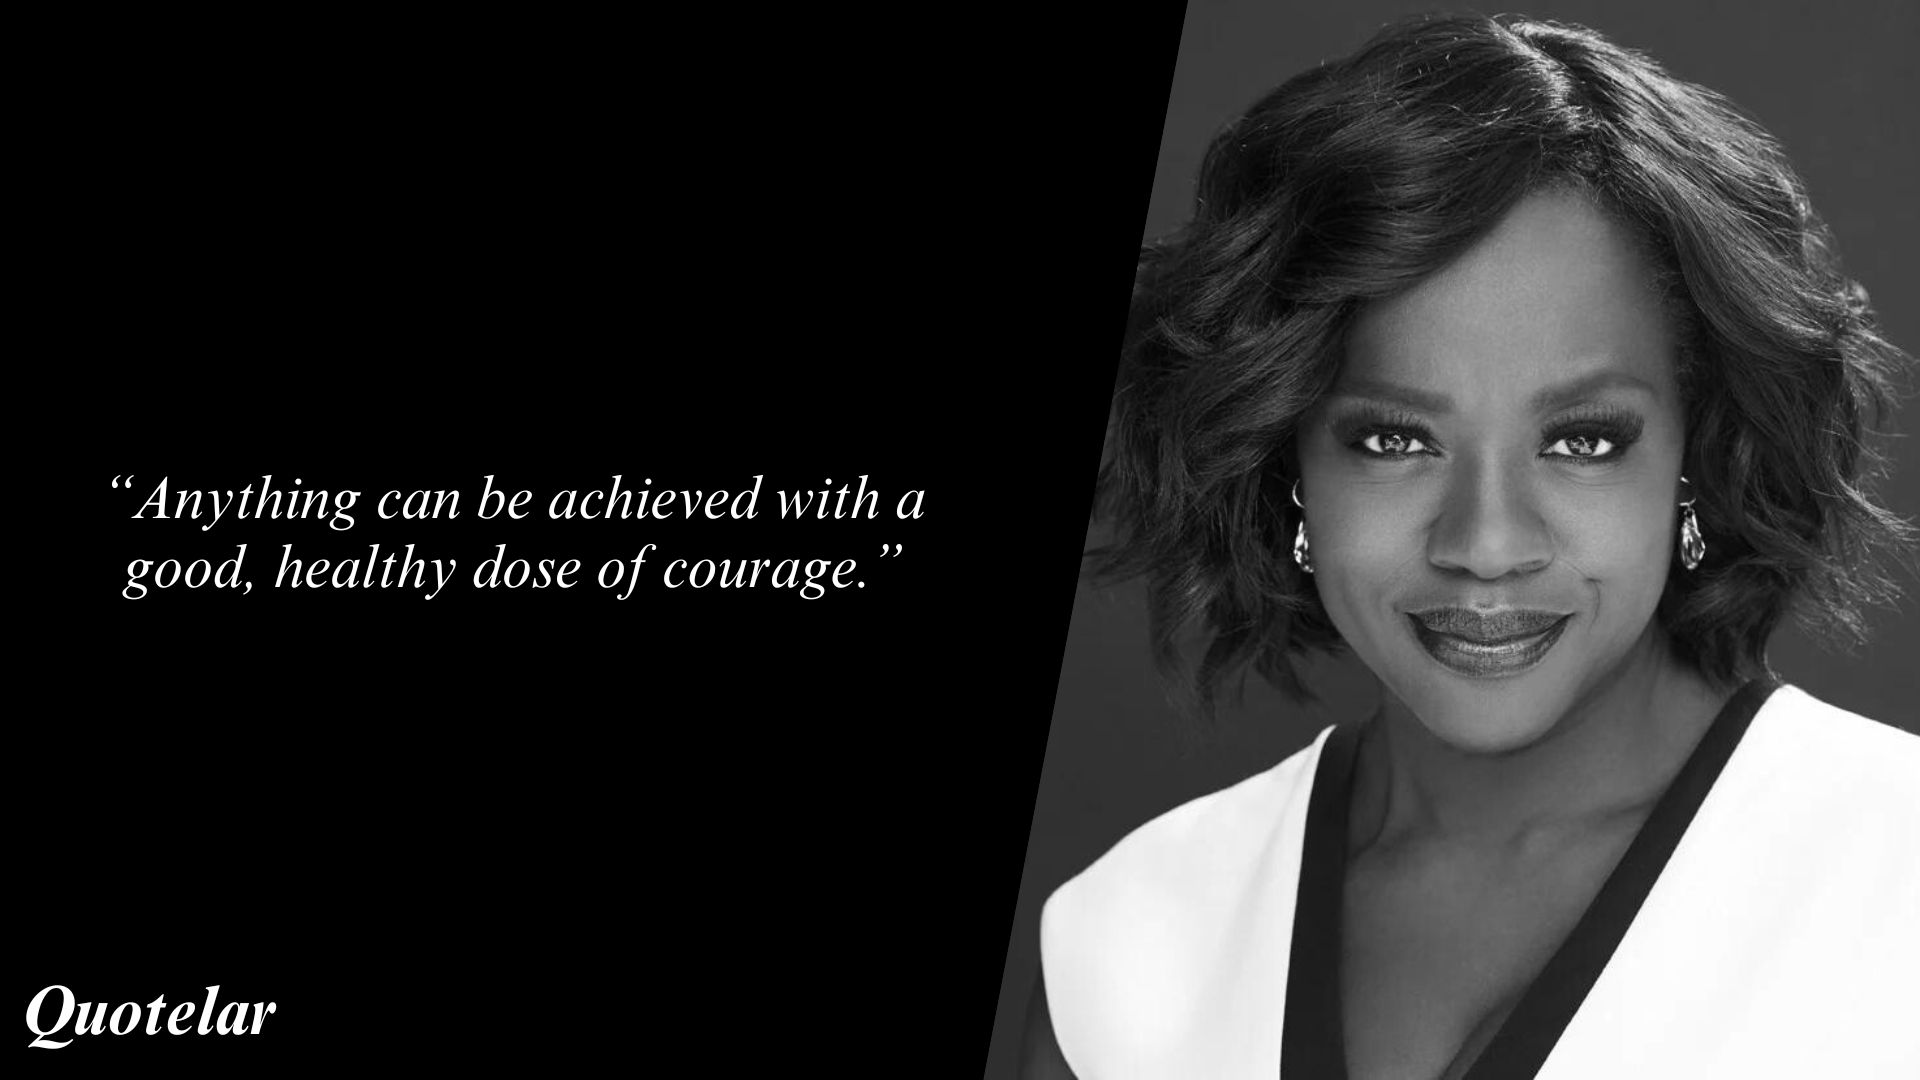 Viola Davis Knows the Power of Authenticity - and a Good